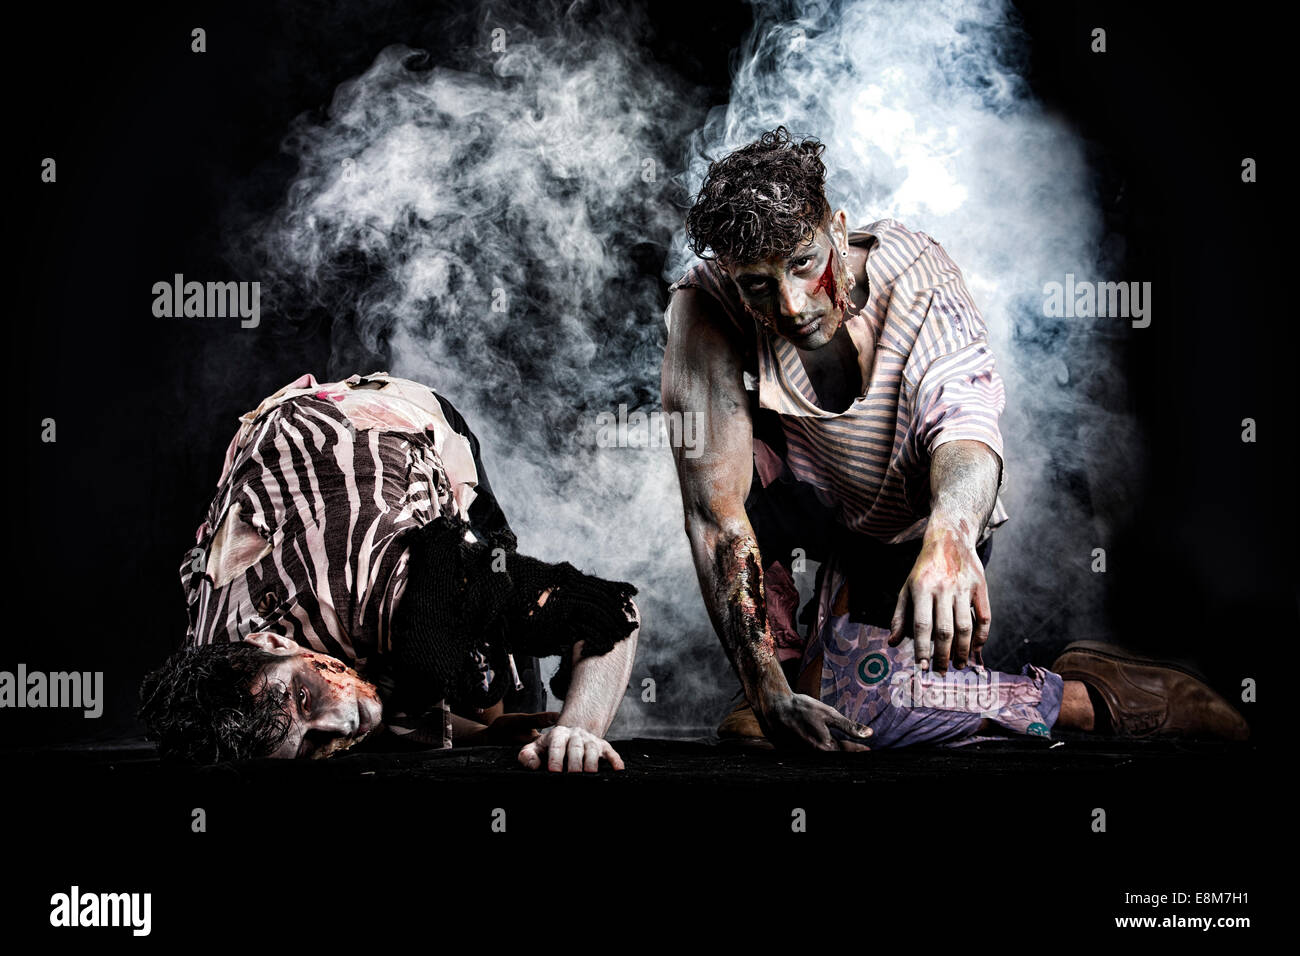 Two male zombies crawling on their knees, on black smoky background, looking at camera. Halloween theme Stock Photo